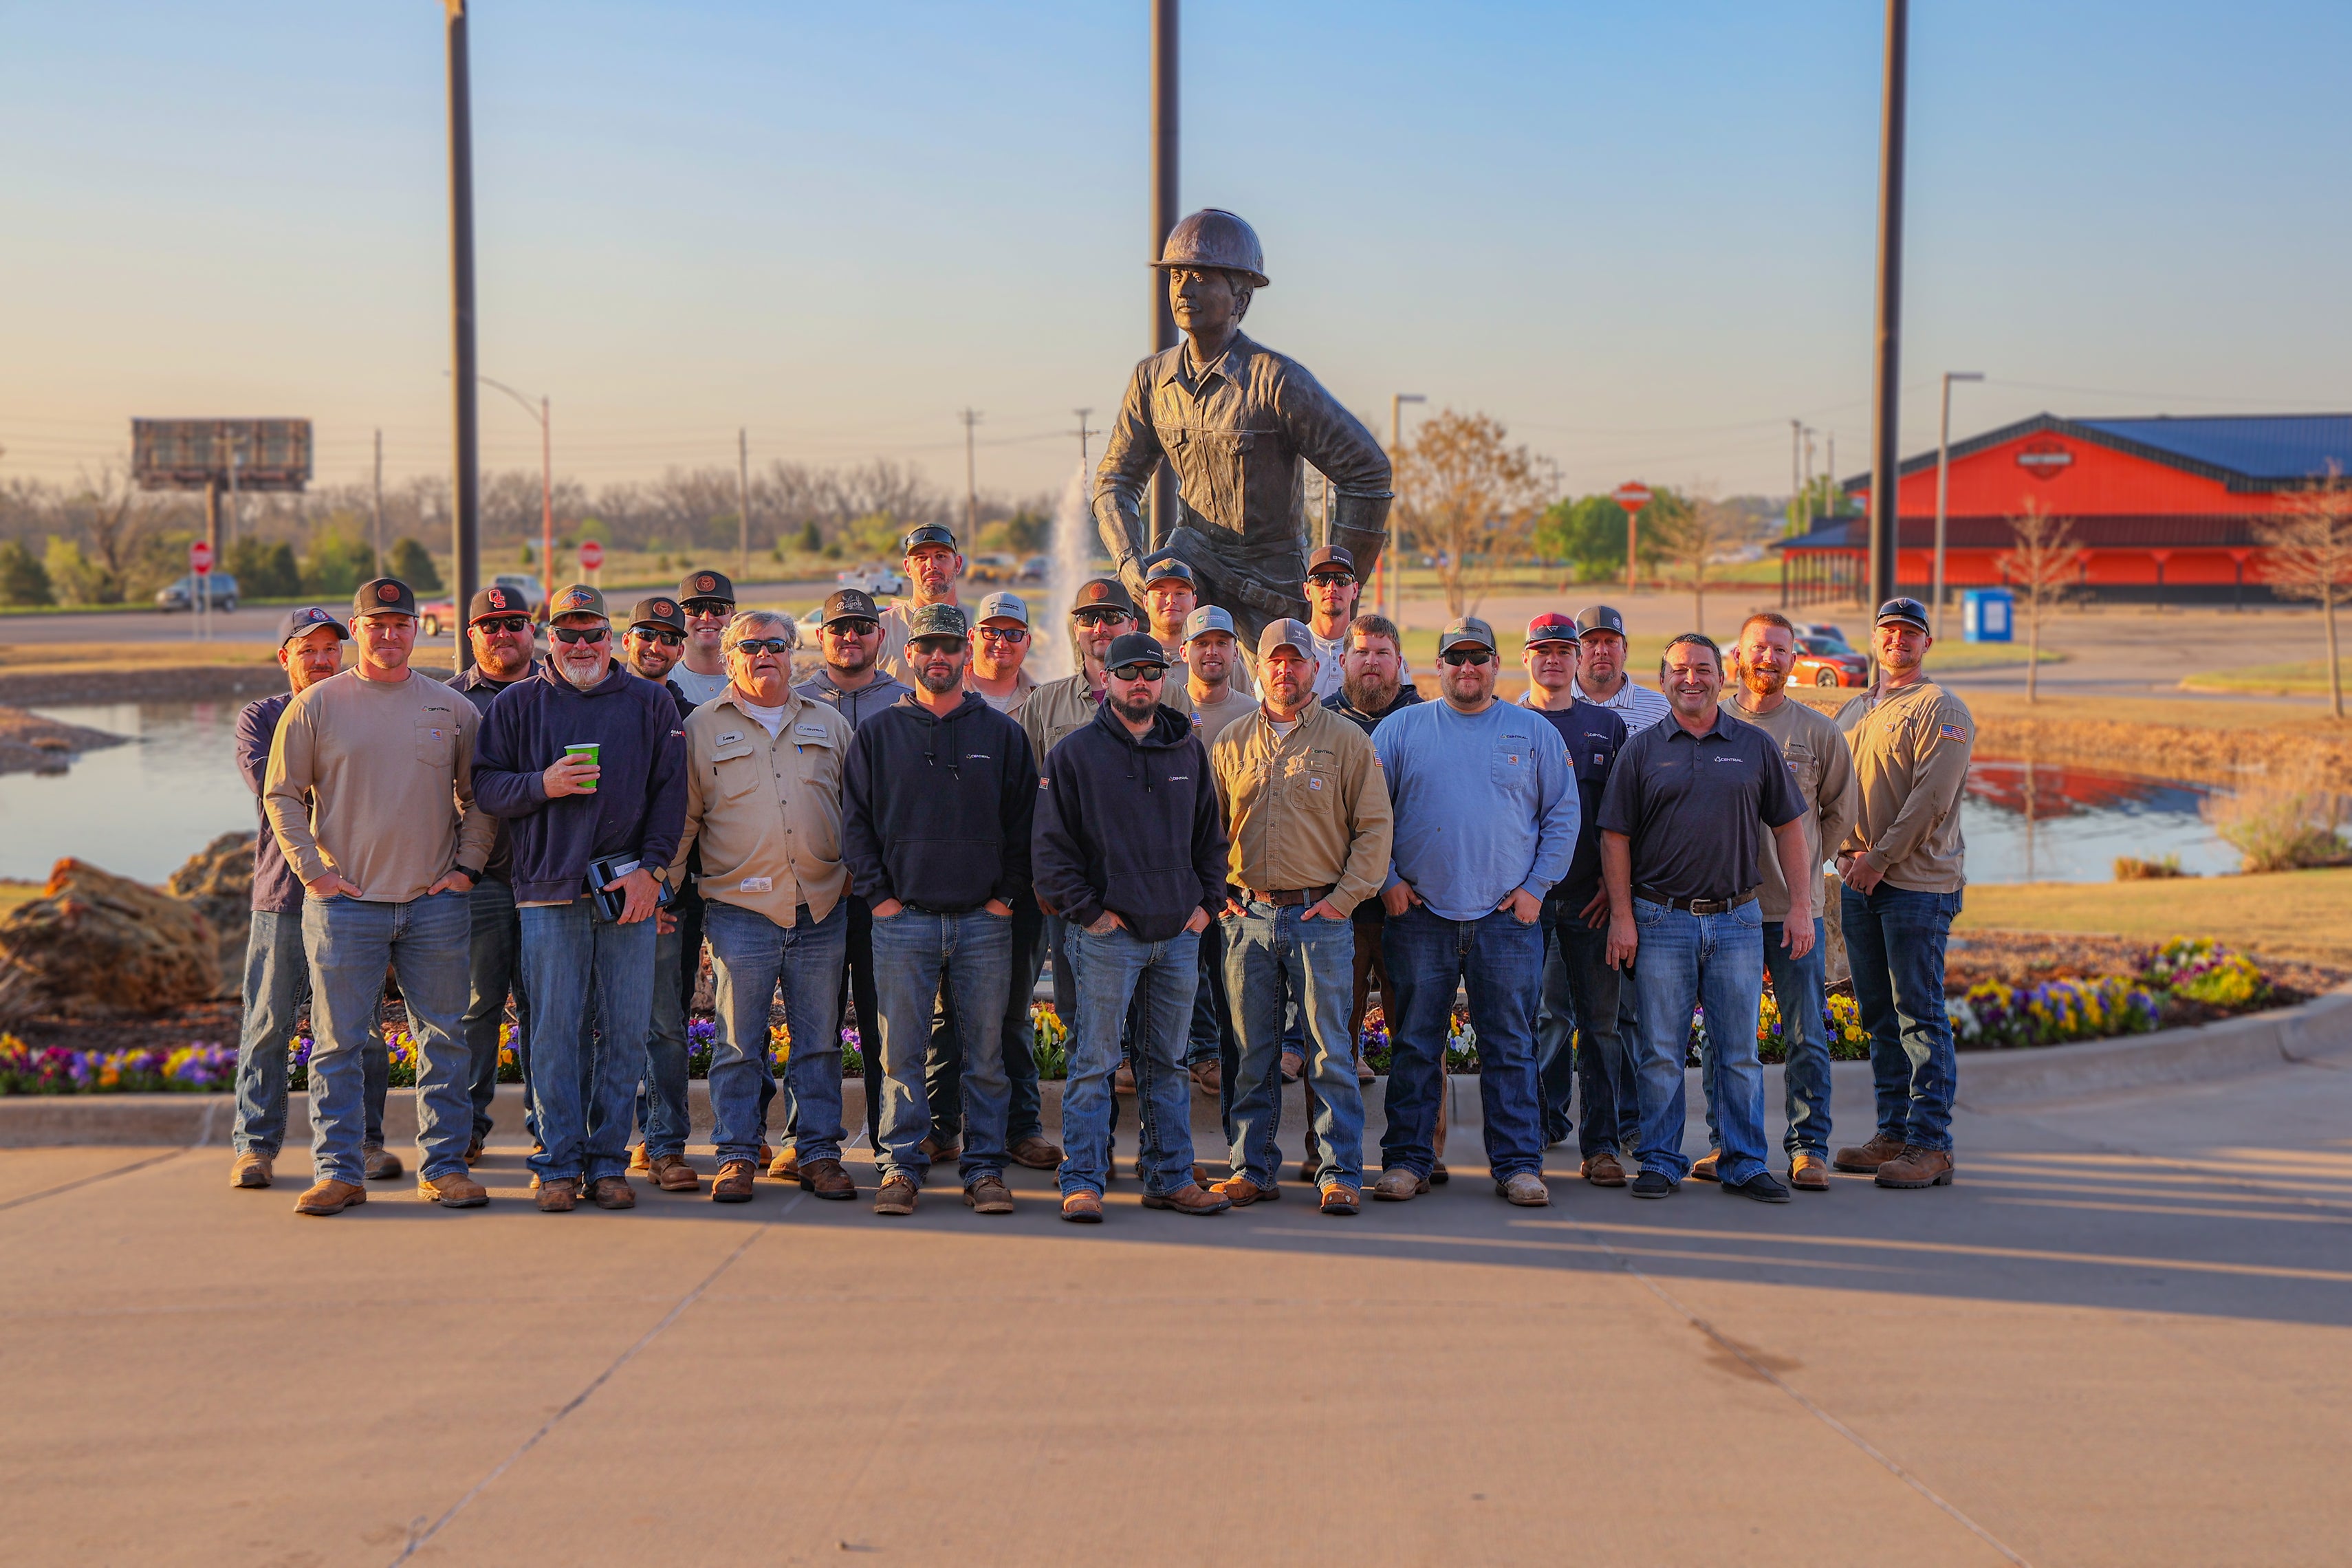 Central linemen pose in front of the lineman statue at Central Rural Electric Cooperative.